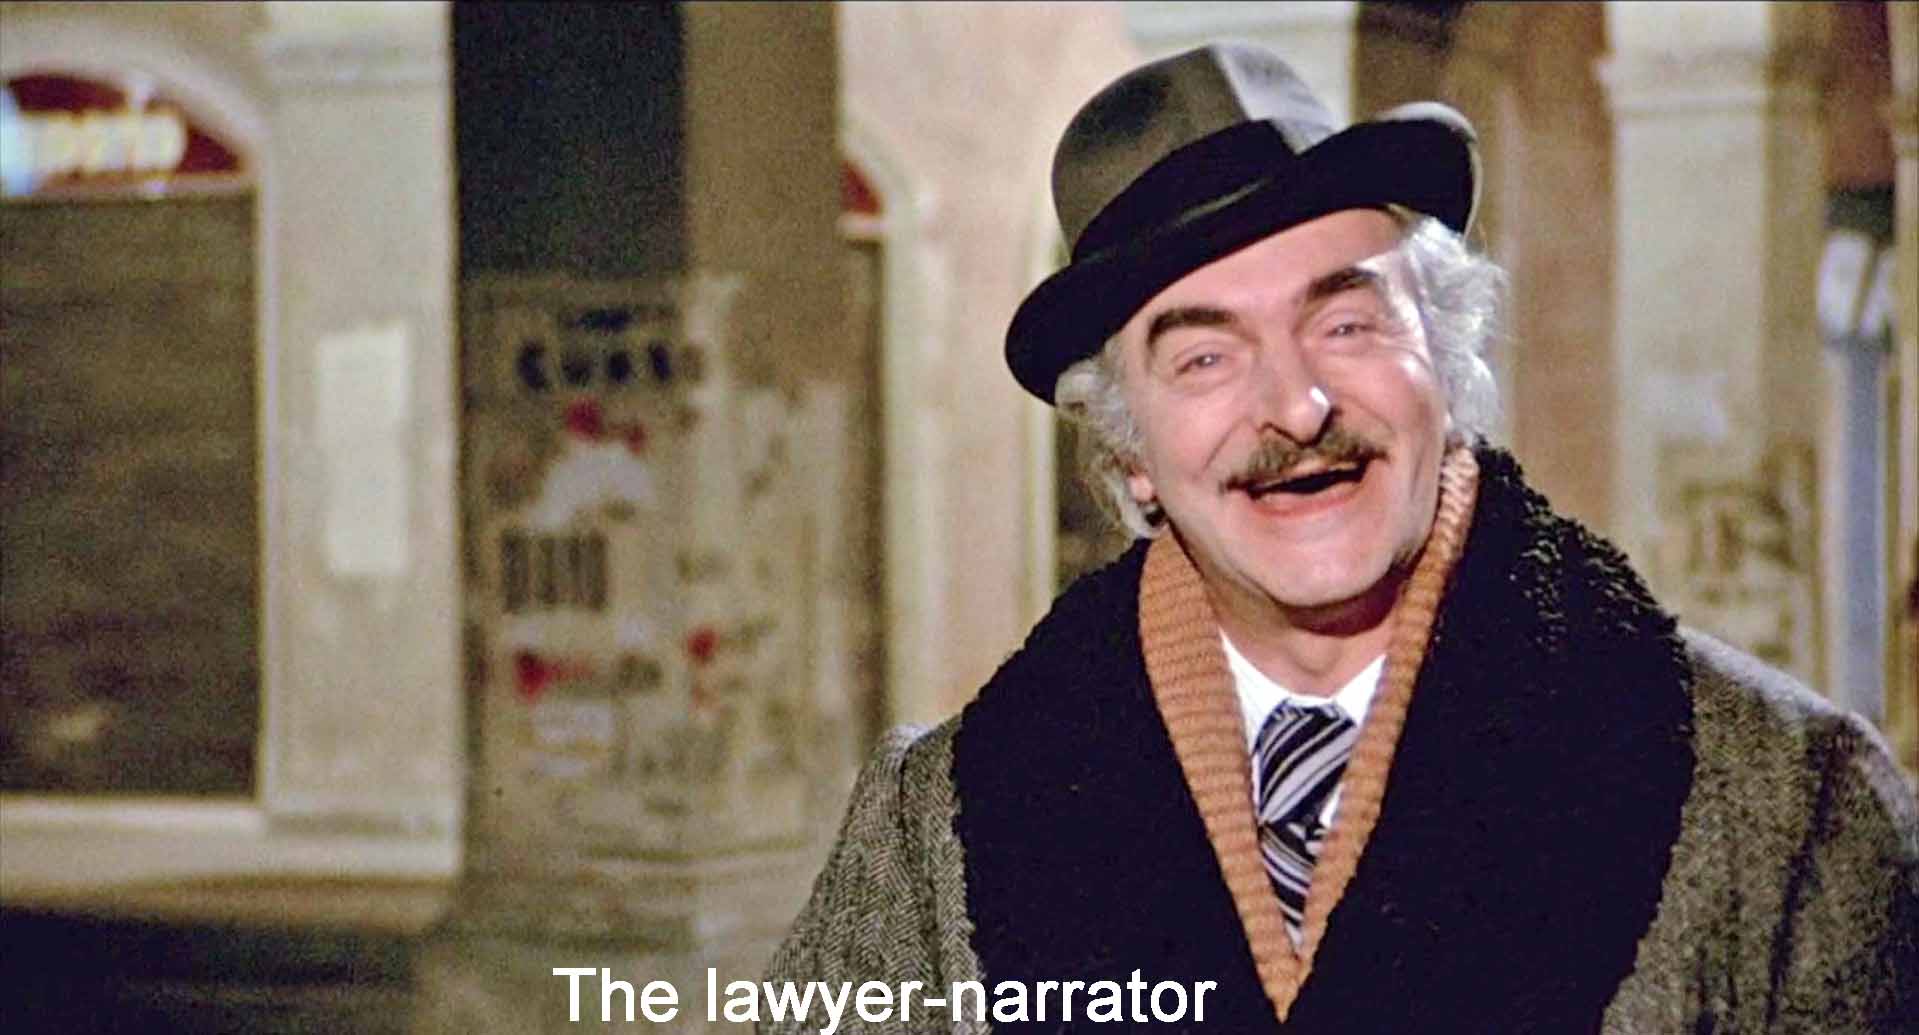 The lawyer-narrator